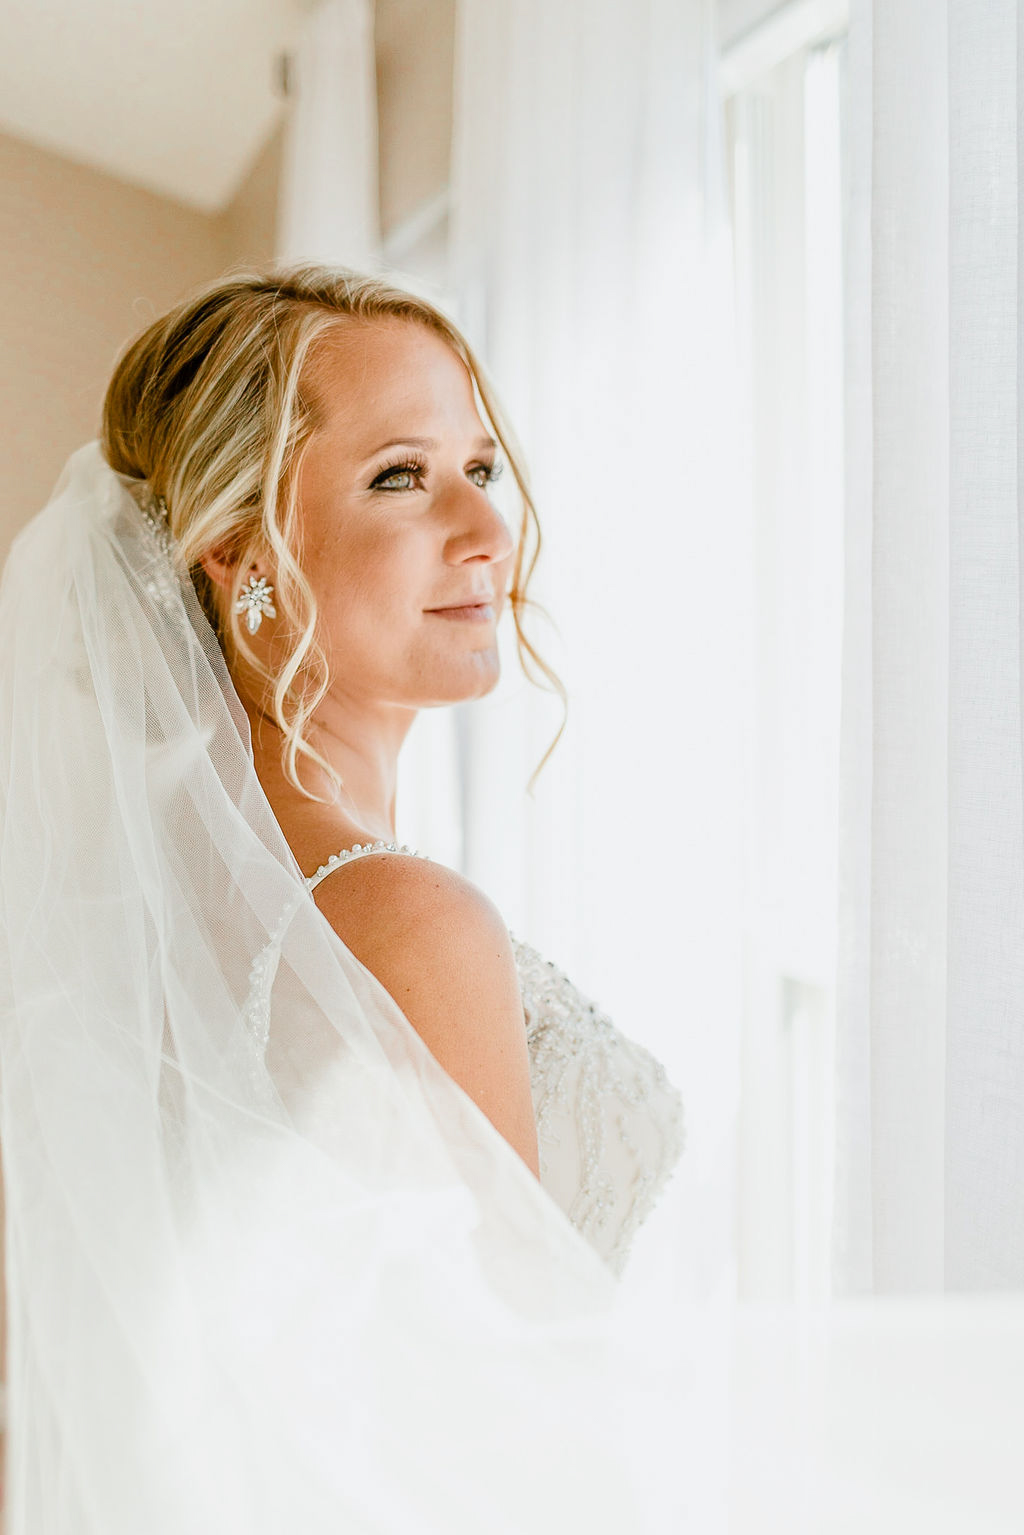 This beautiful Ohio wedding is a like a dream! We love the beautiful pink touches, gorgeous flowers, soft light, and contagious smiles from this adorable couple. If you're leaning towards a blush wedding of your own, you need to check this one out! This couple knows how to plan an amazing wedding! 